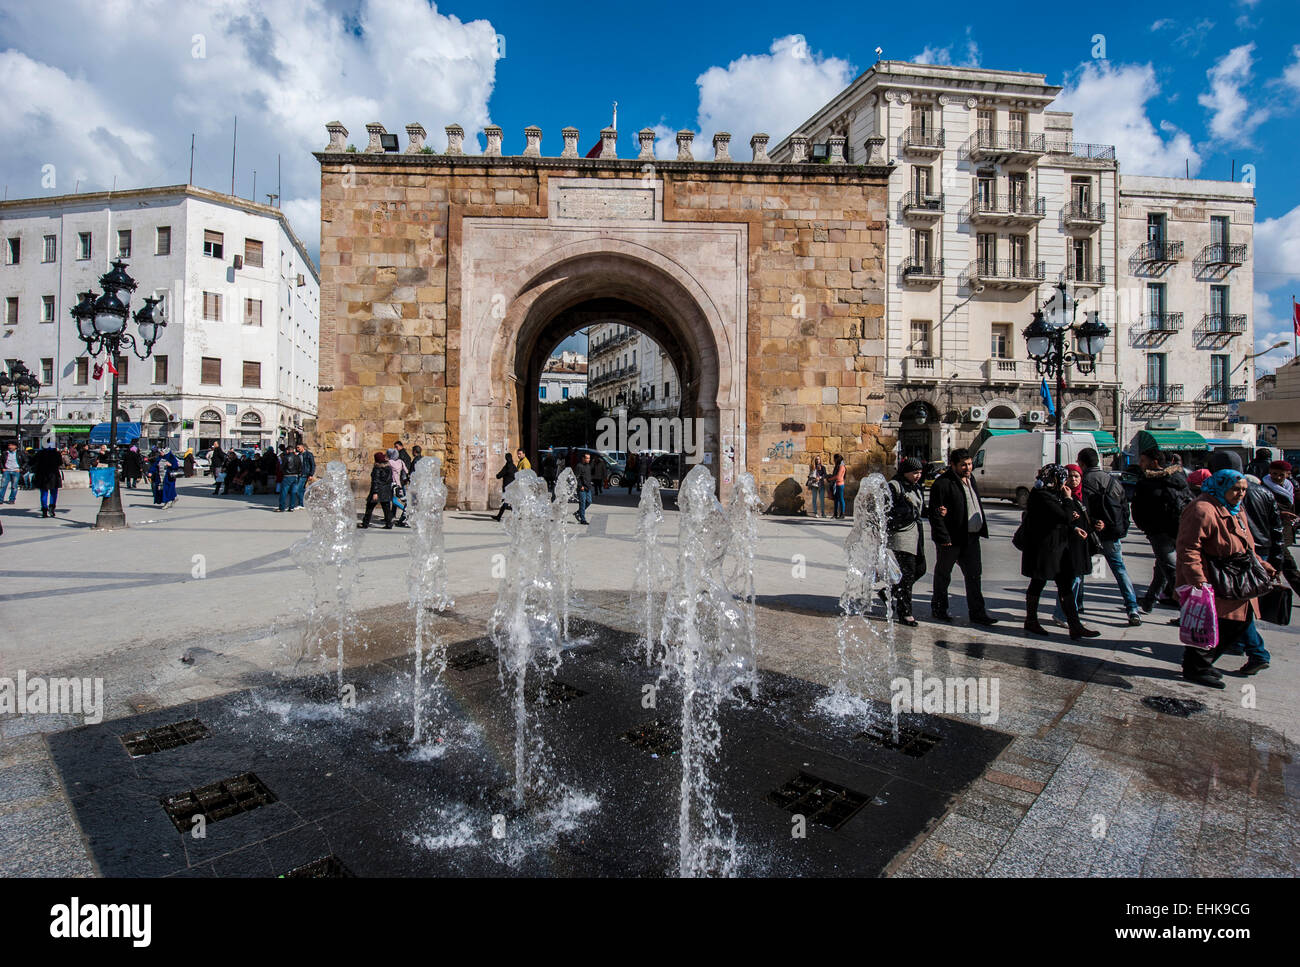 Bab Bhar, also called the Porte de France or French Gate, in Tunis, Tunisia. Stock Photo